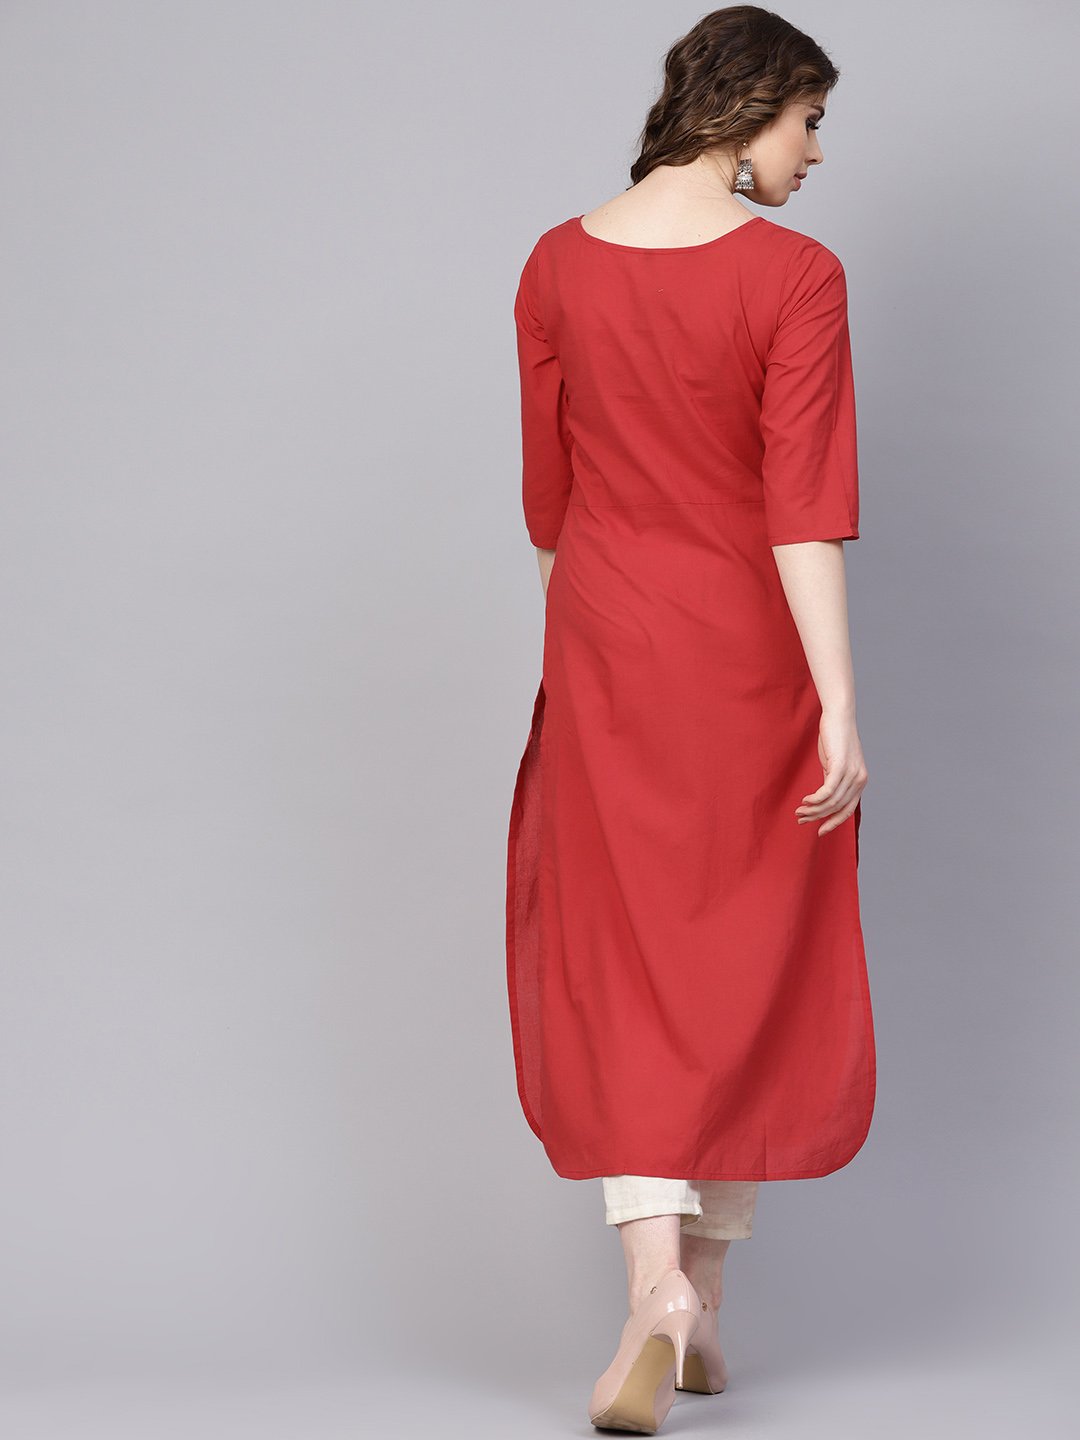 Women's Solid Red Kurta With Thread Stitch And Tassels Detailing With A Round Neck And 3/4Th Sleeves - Nayo Clothing